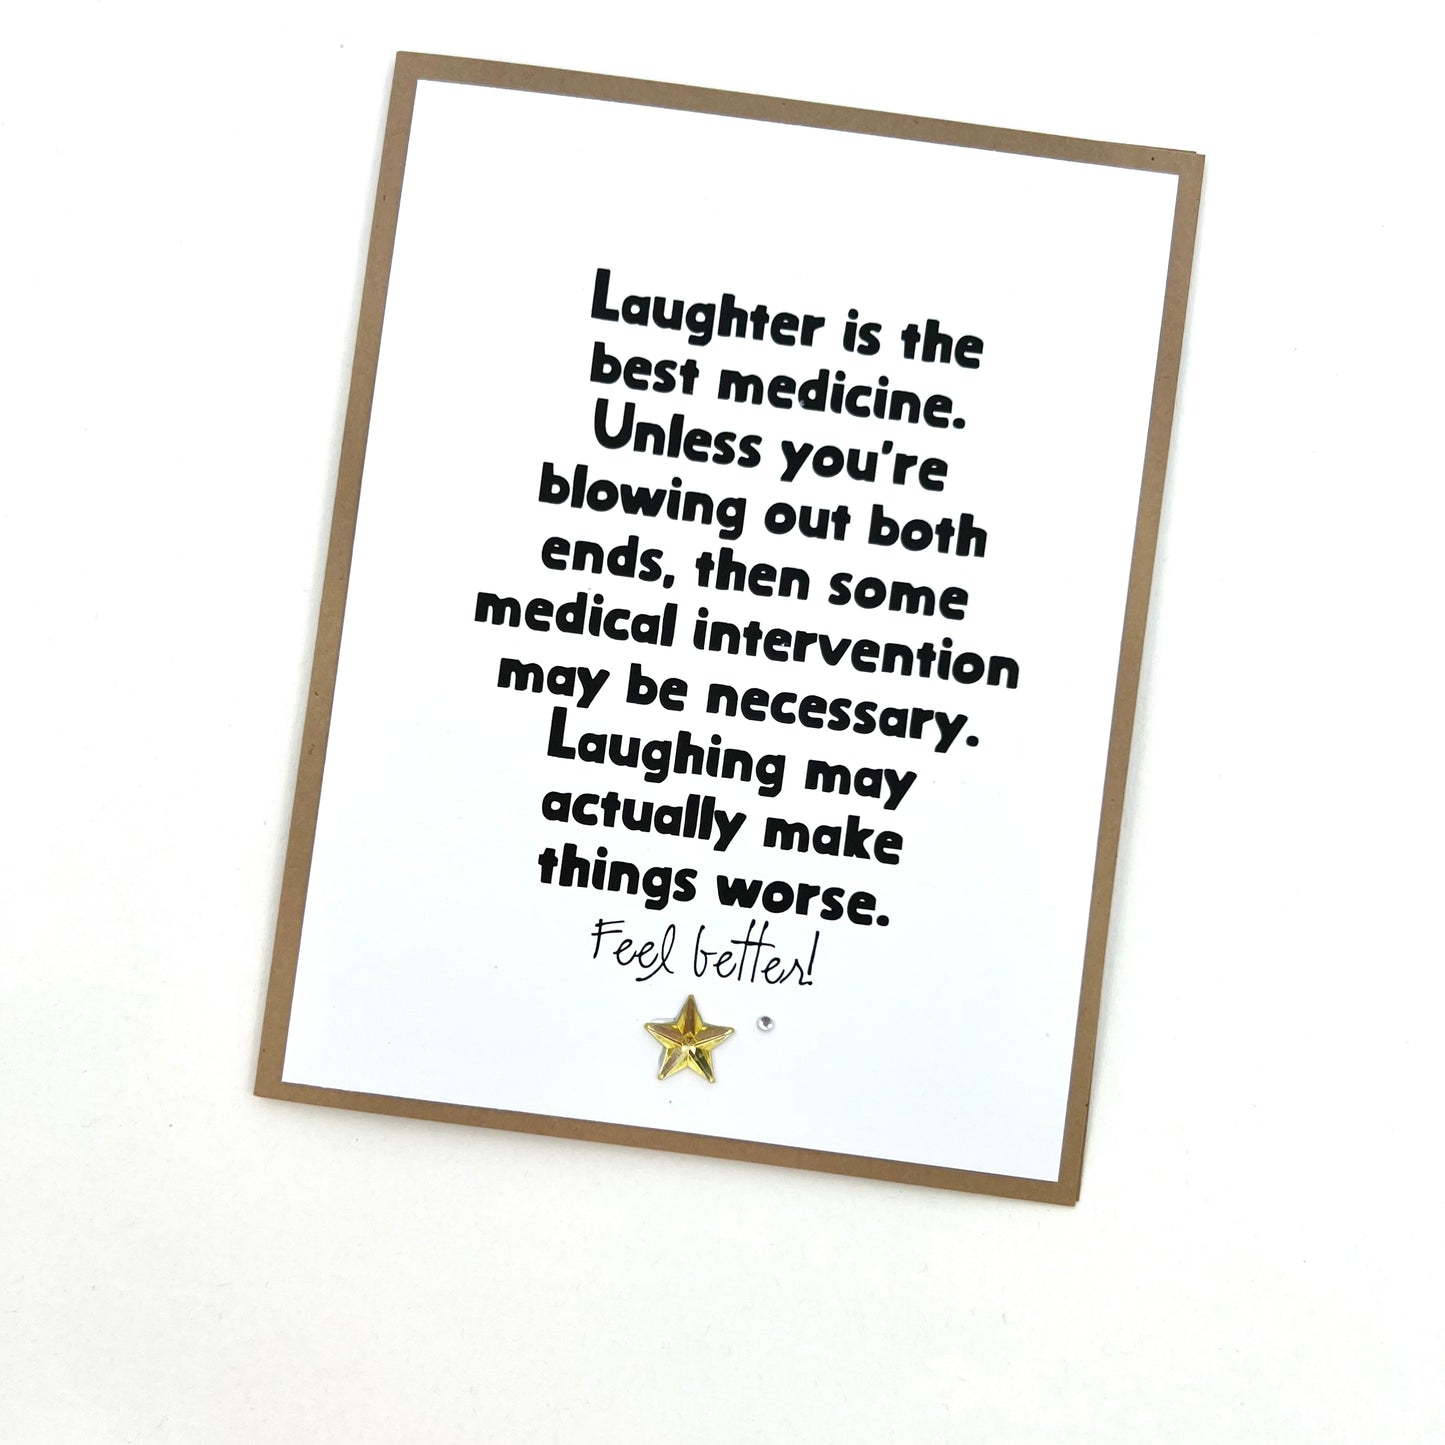 Laughter Best Medicine Blowing Both Ends card